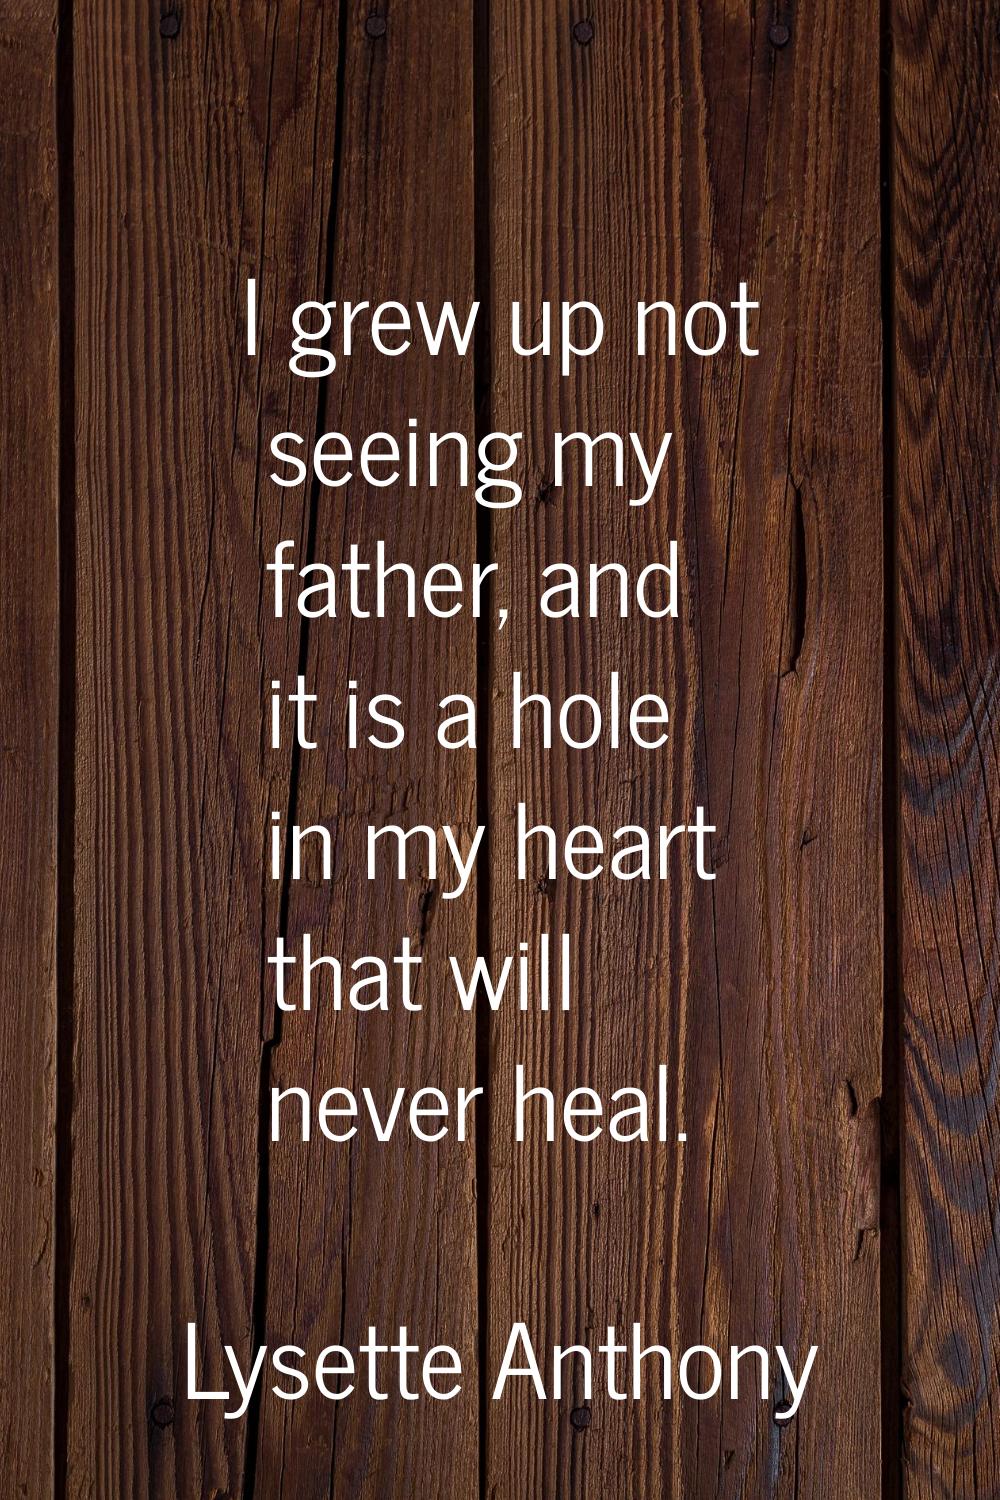 I grew up not seeing my father, and it is a hole in my heart that will never heal.